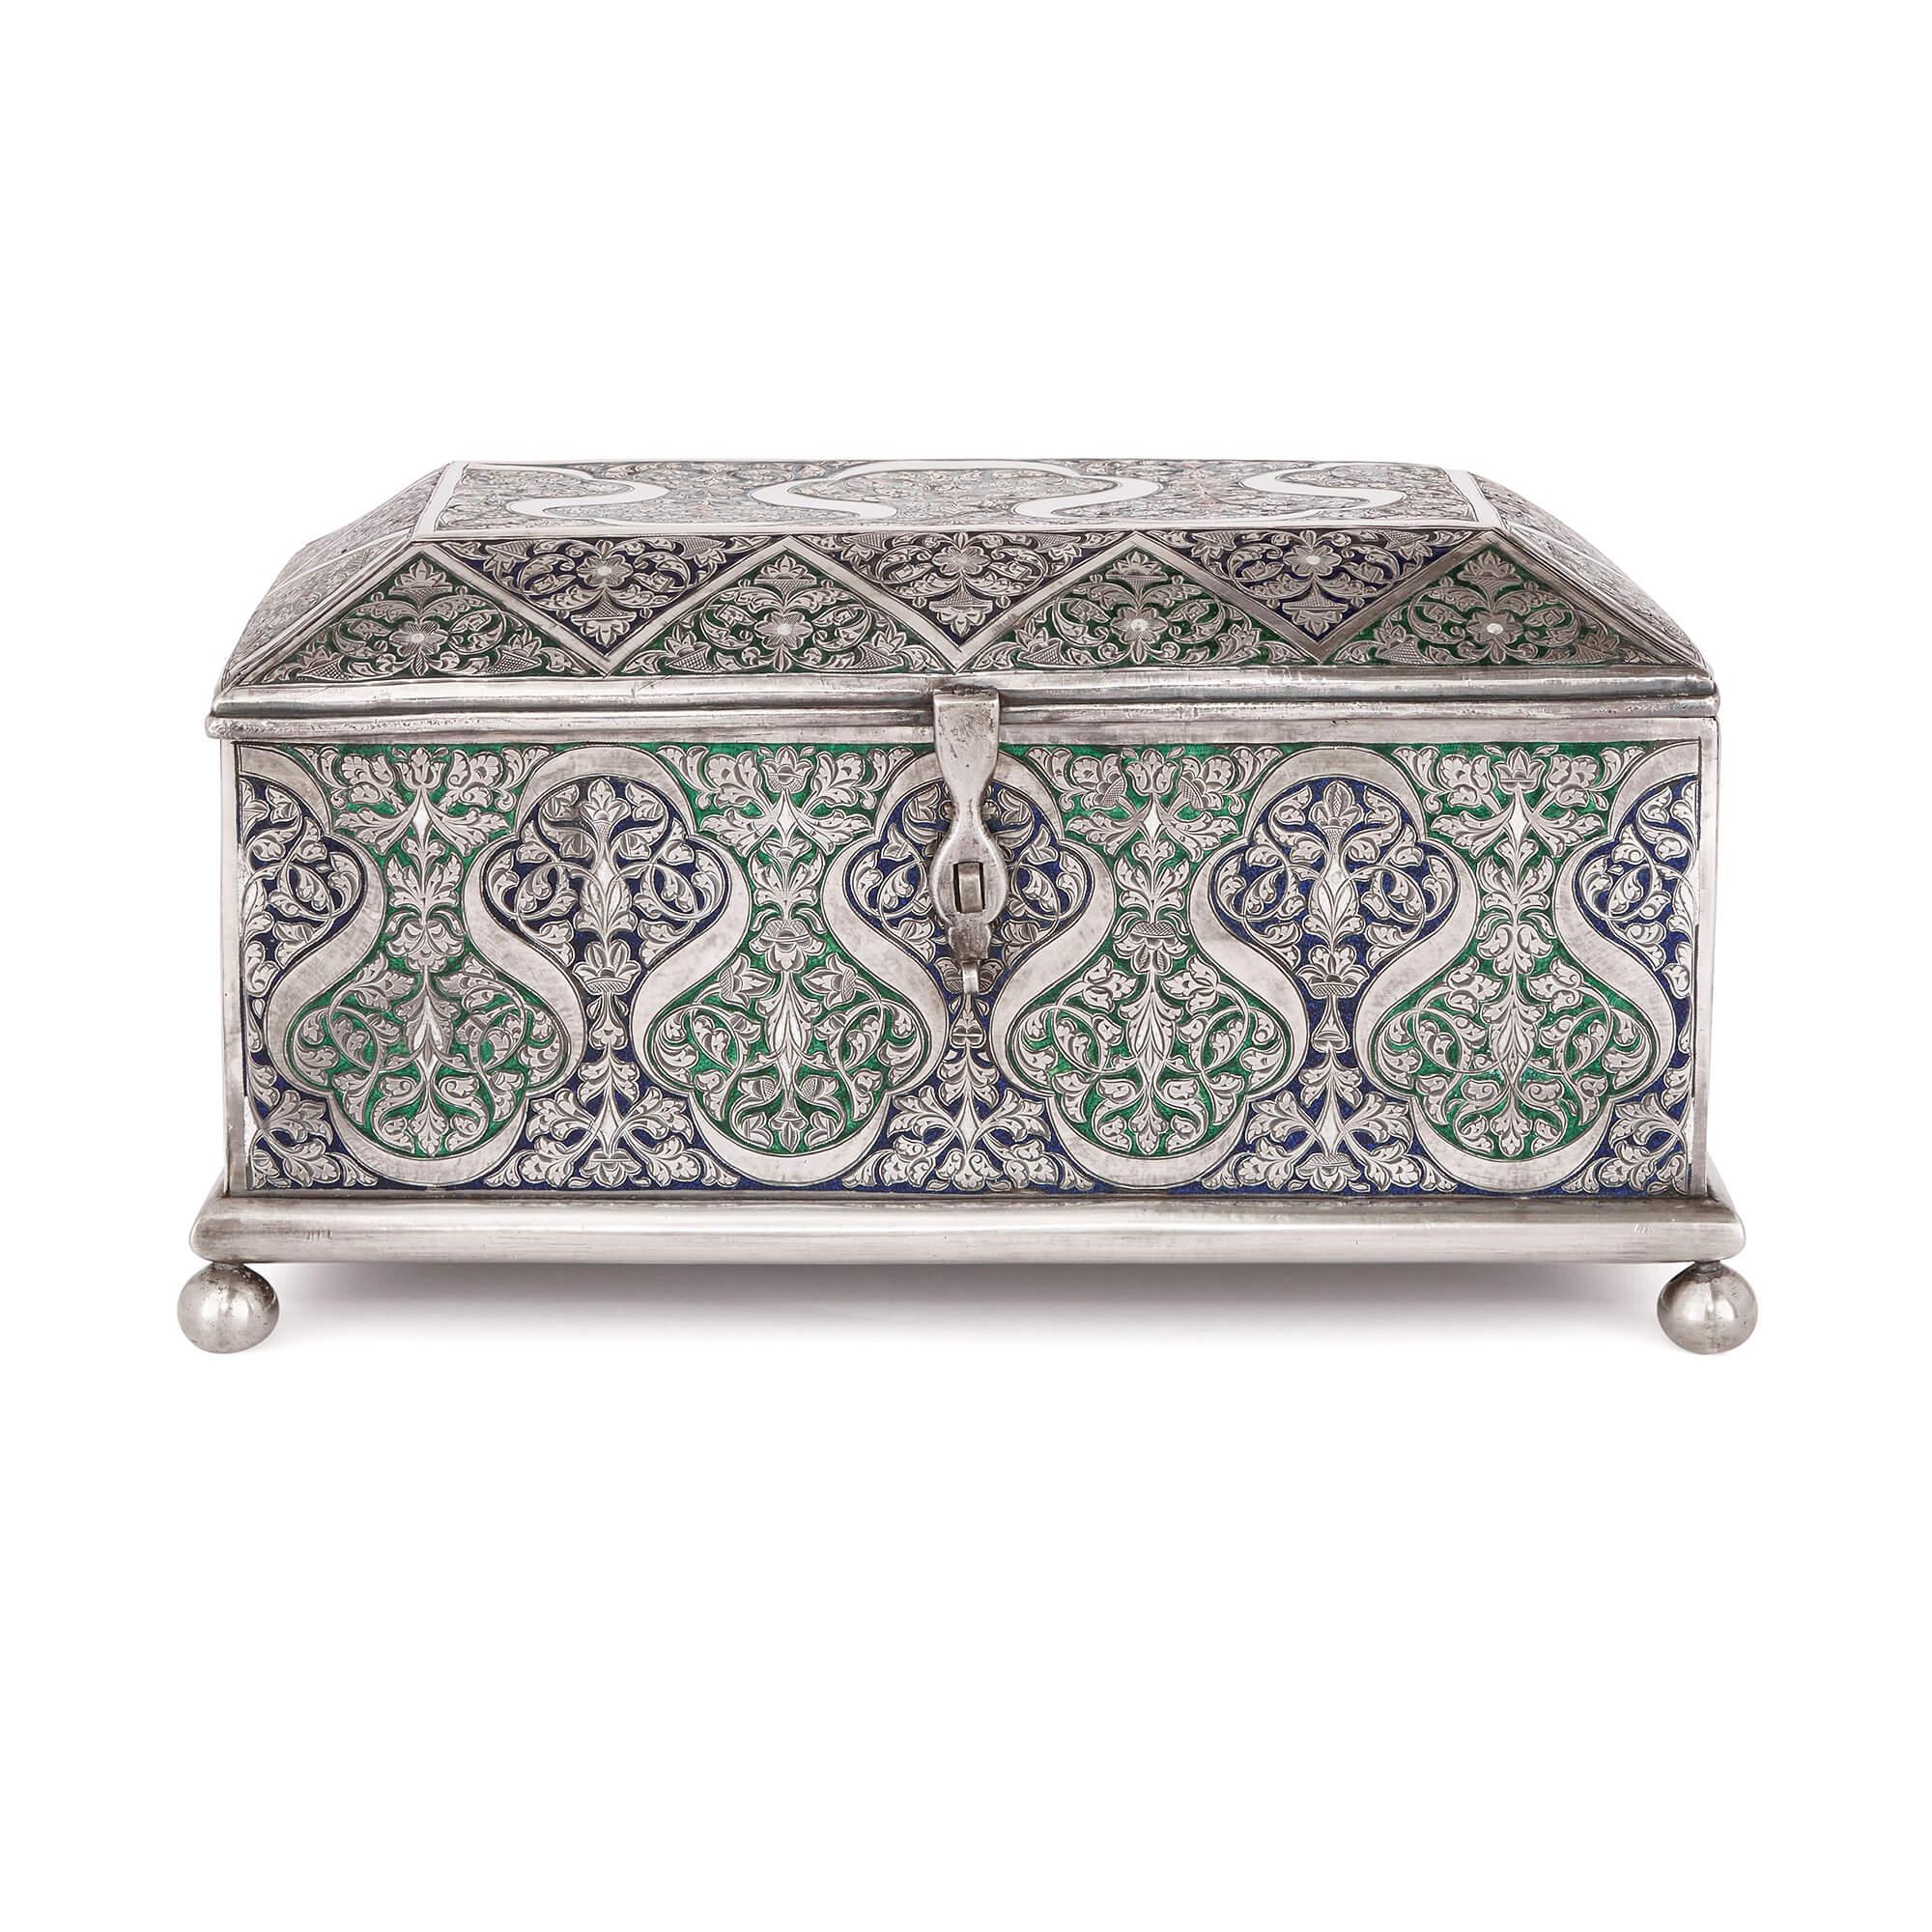 This large silver jewelry box is a beautiful piece of design: precious, refined and intricately-decorated. The box measures 33 centimeters (12 inches) in width, making it perfect for the storage of larger and more precious pieces of jewelry. It is